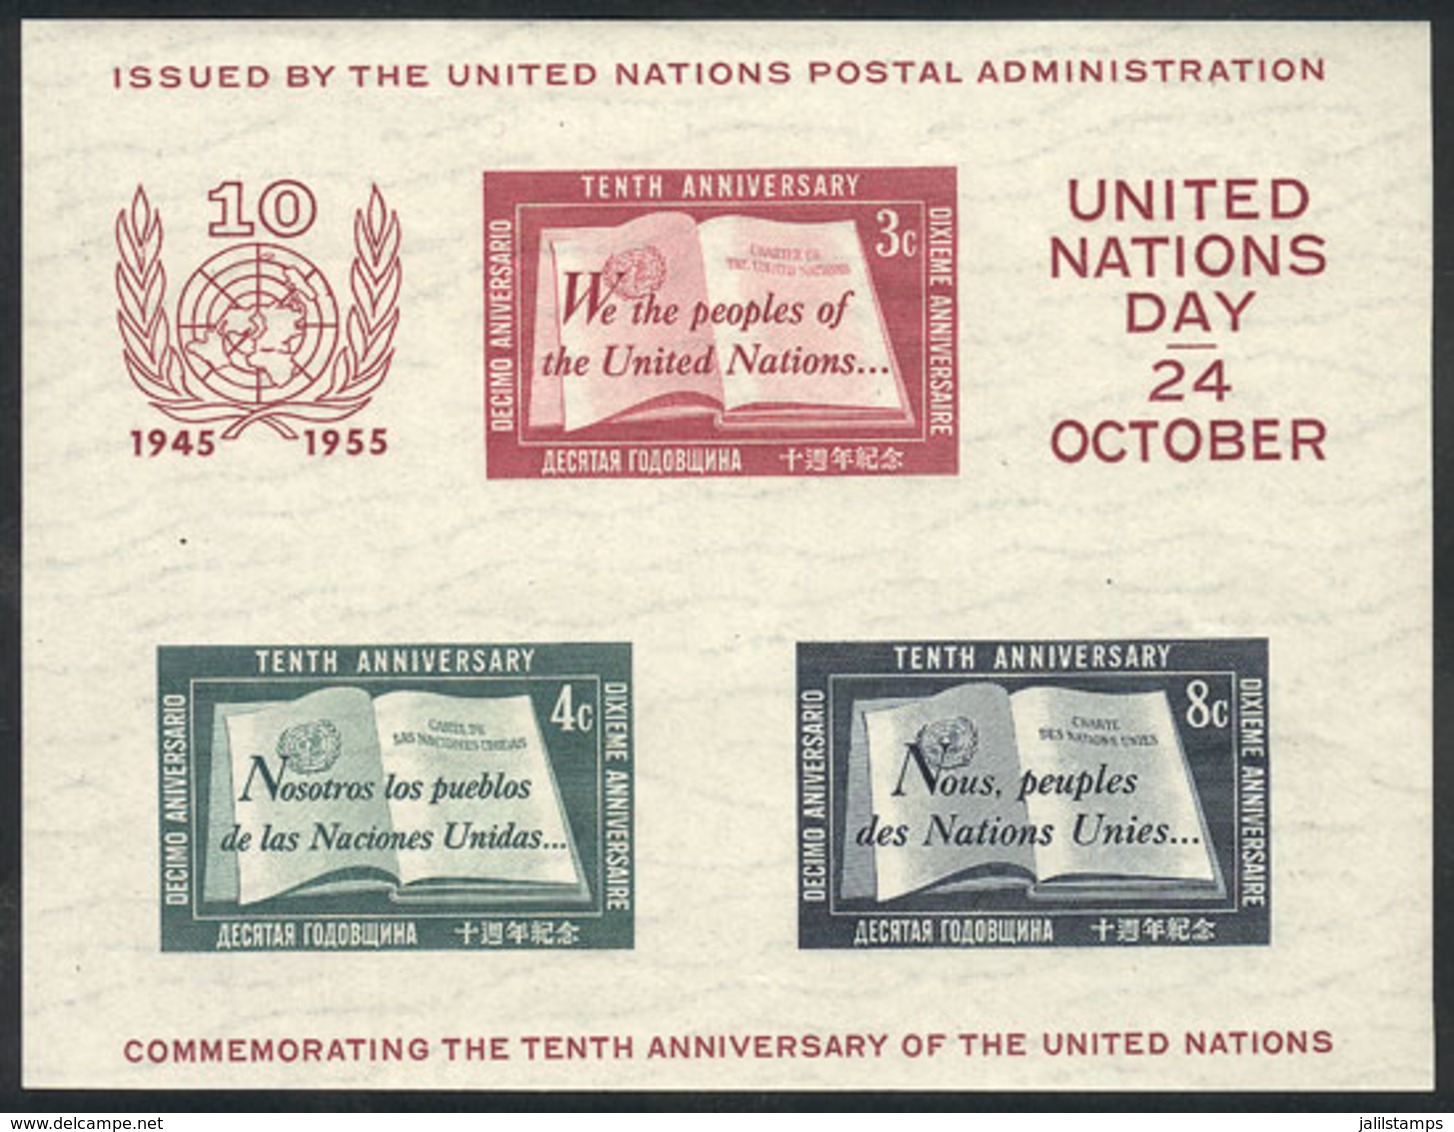 1071 UNITED NATIONS: Yvert 1, 1955 UNO 10 Years, MNH, Excellent Quality - ONU